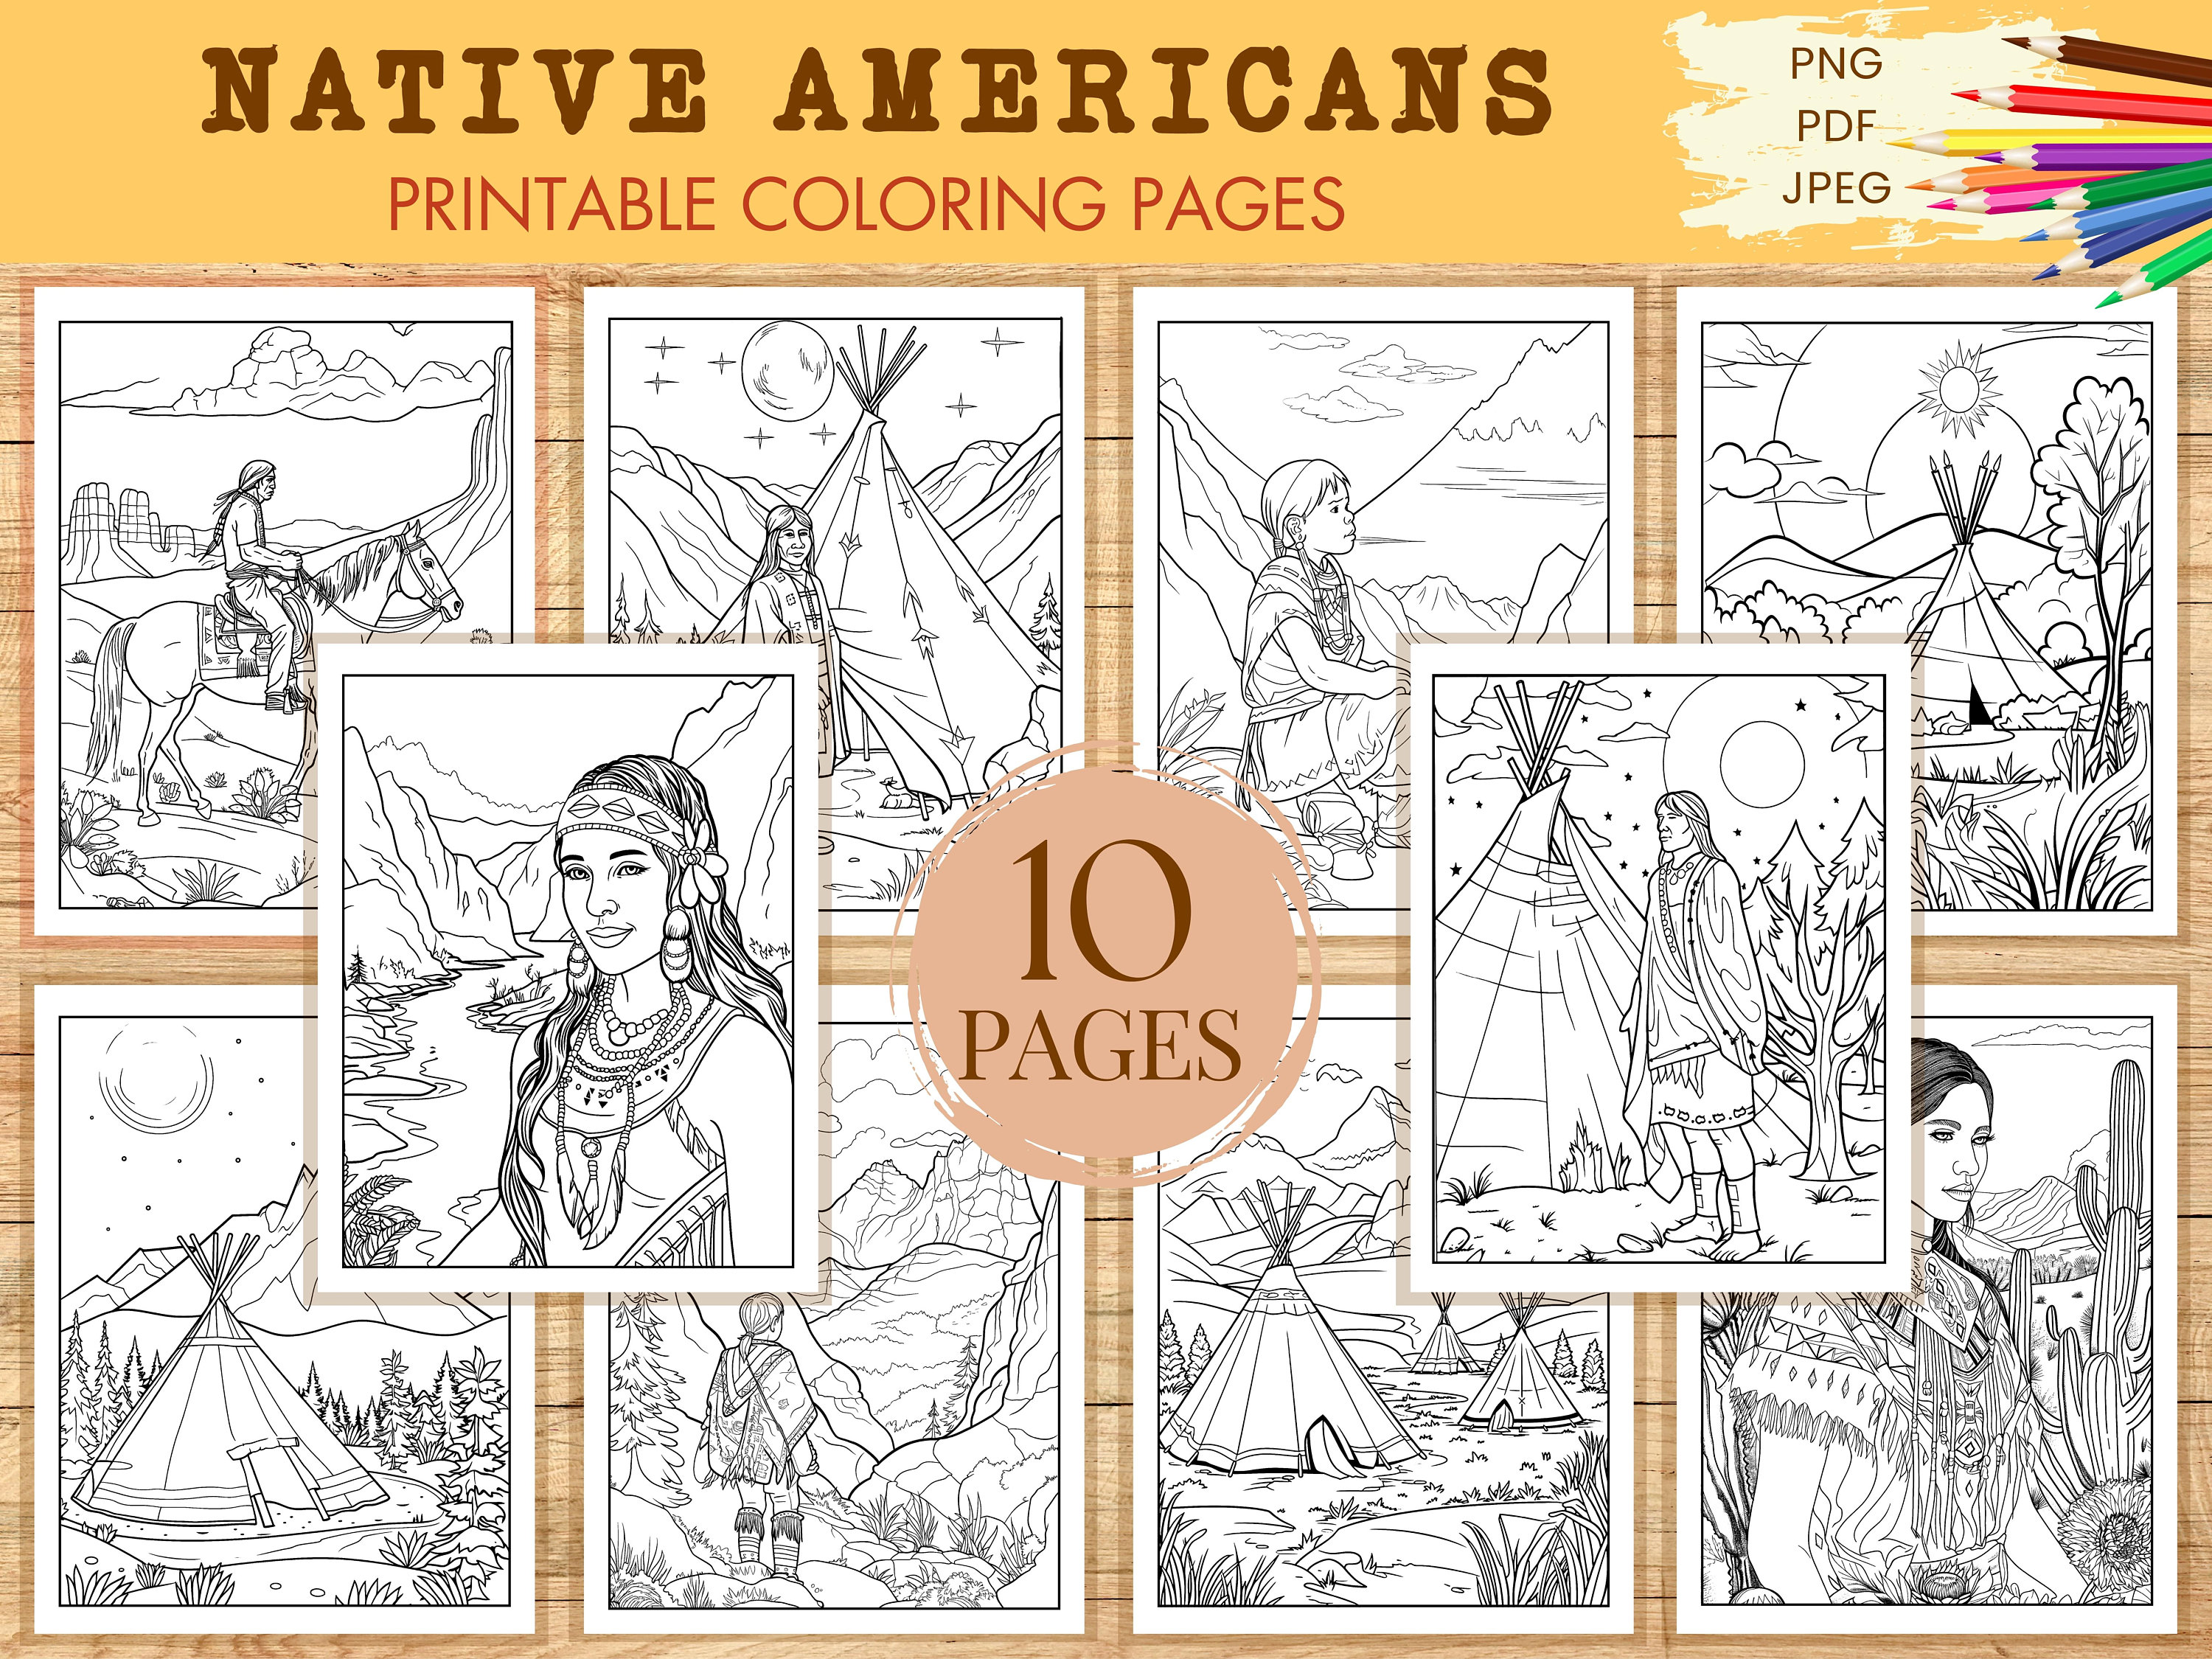 Native americans coloring pages scene landscape people teepee printable pages for adults pdf jpeg png digital download